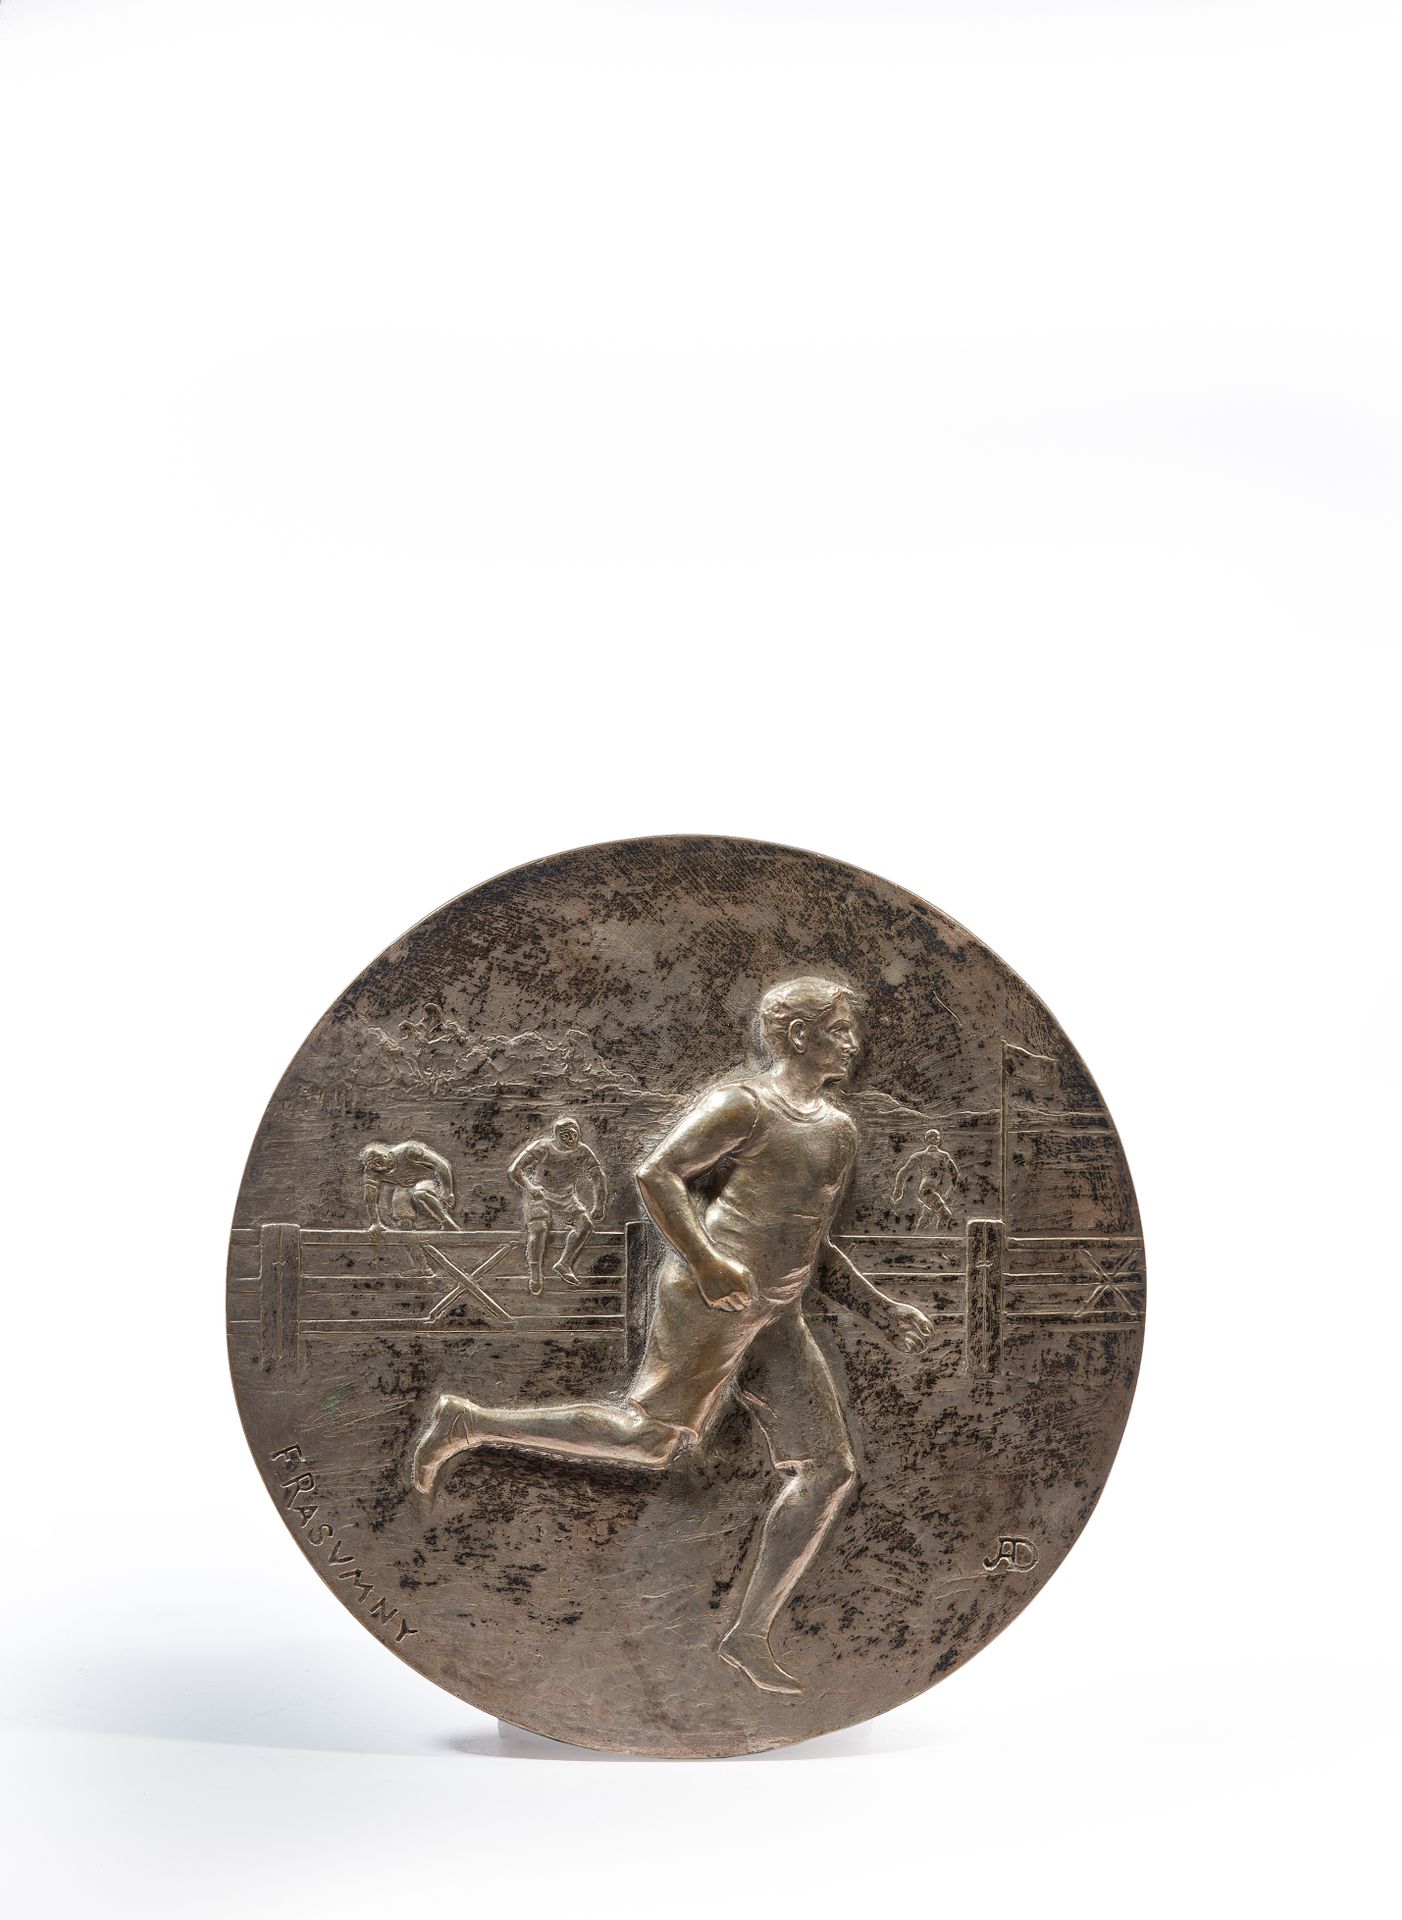 Null Félix RASUMNY (1869-1940)

The foot race

Silvered bronze medallion signed &hellip;